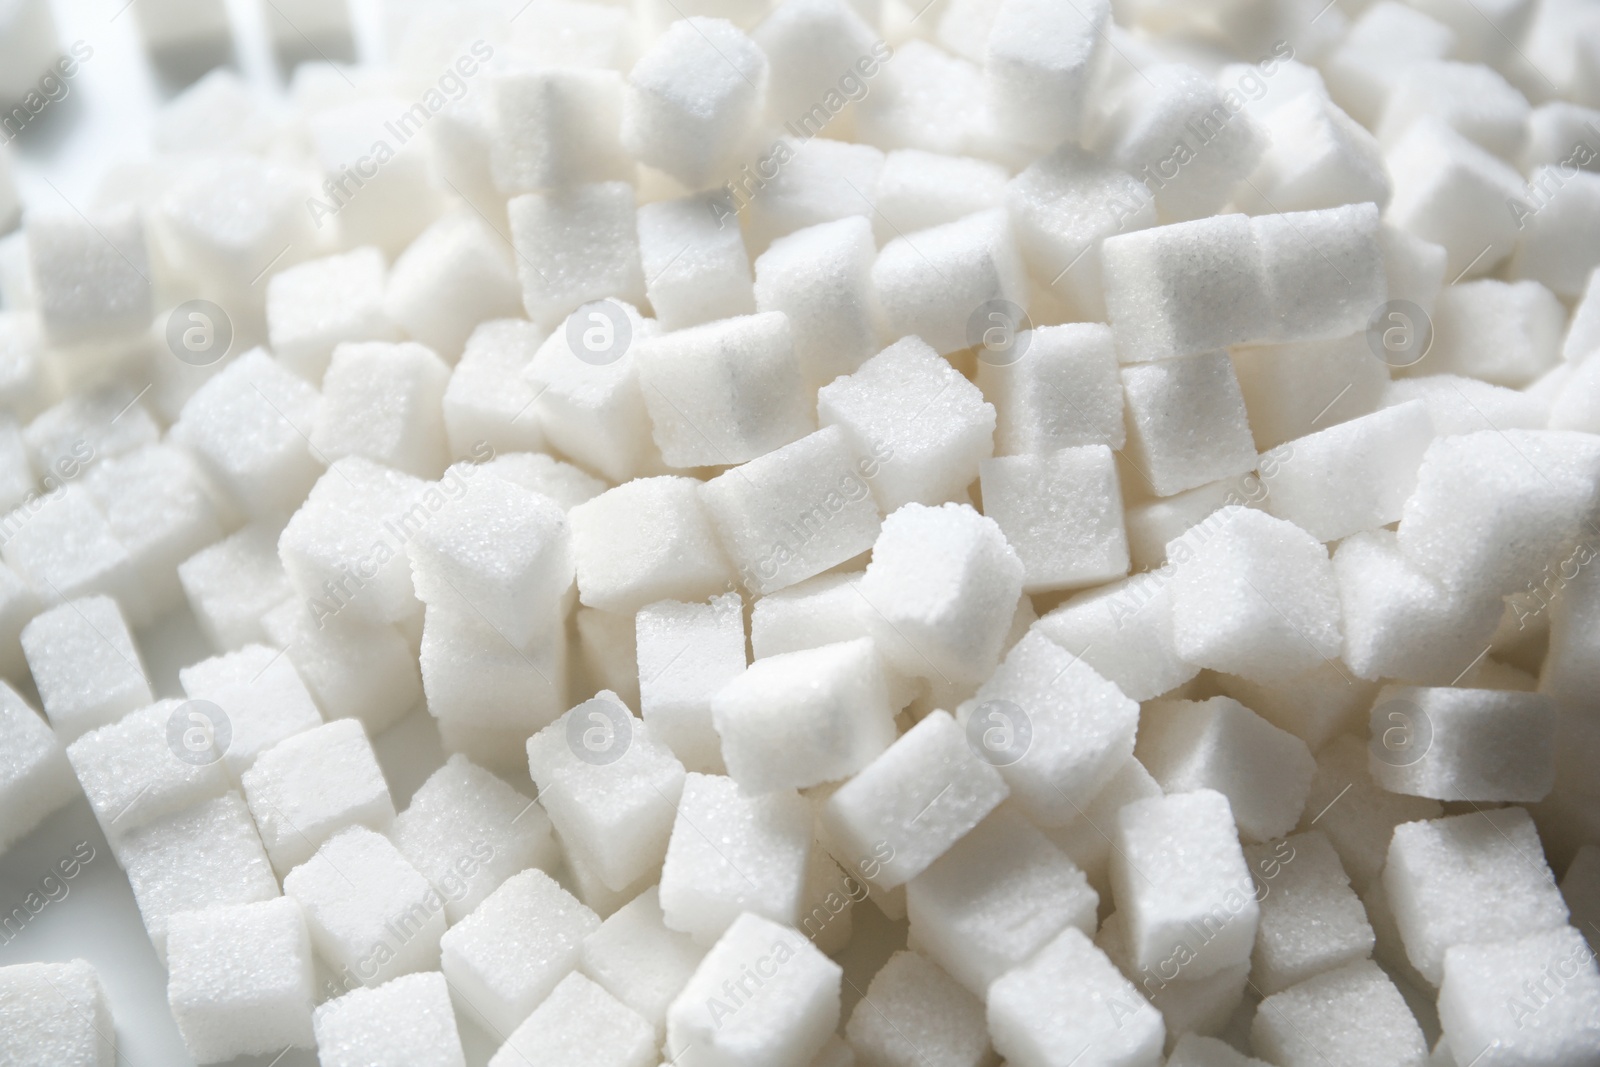 Photo of Refined sugar cubes as background